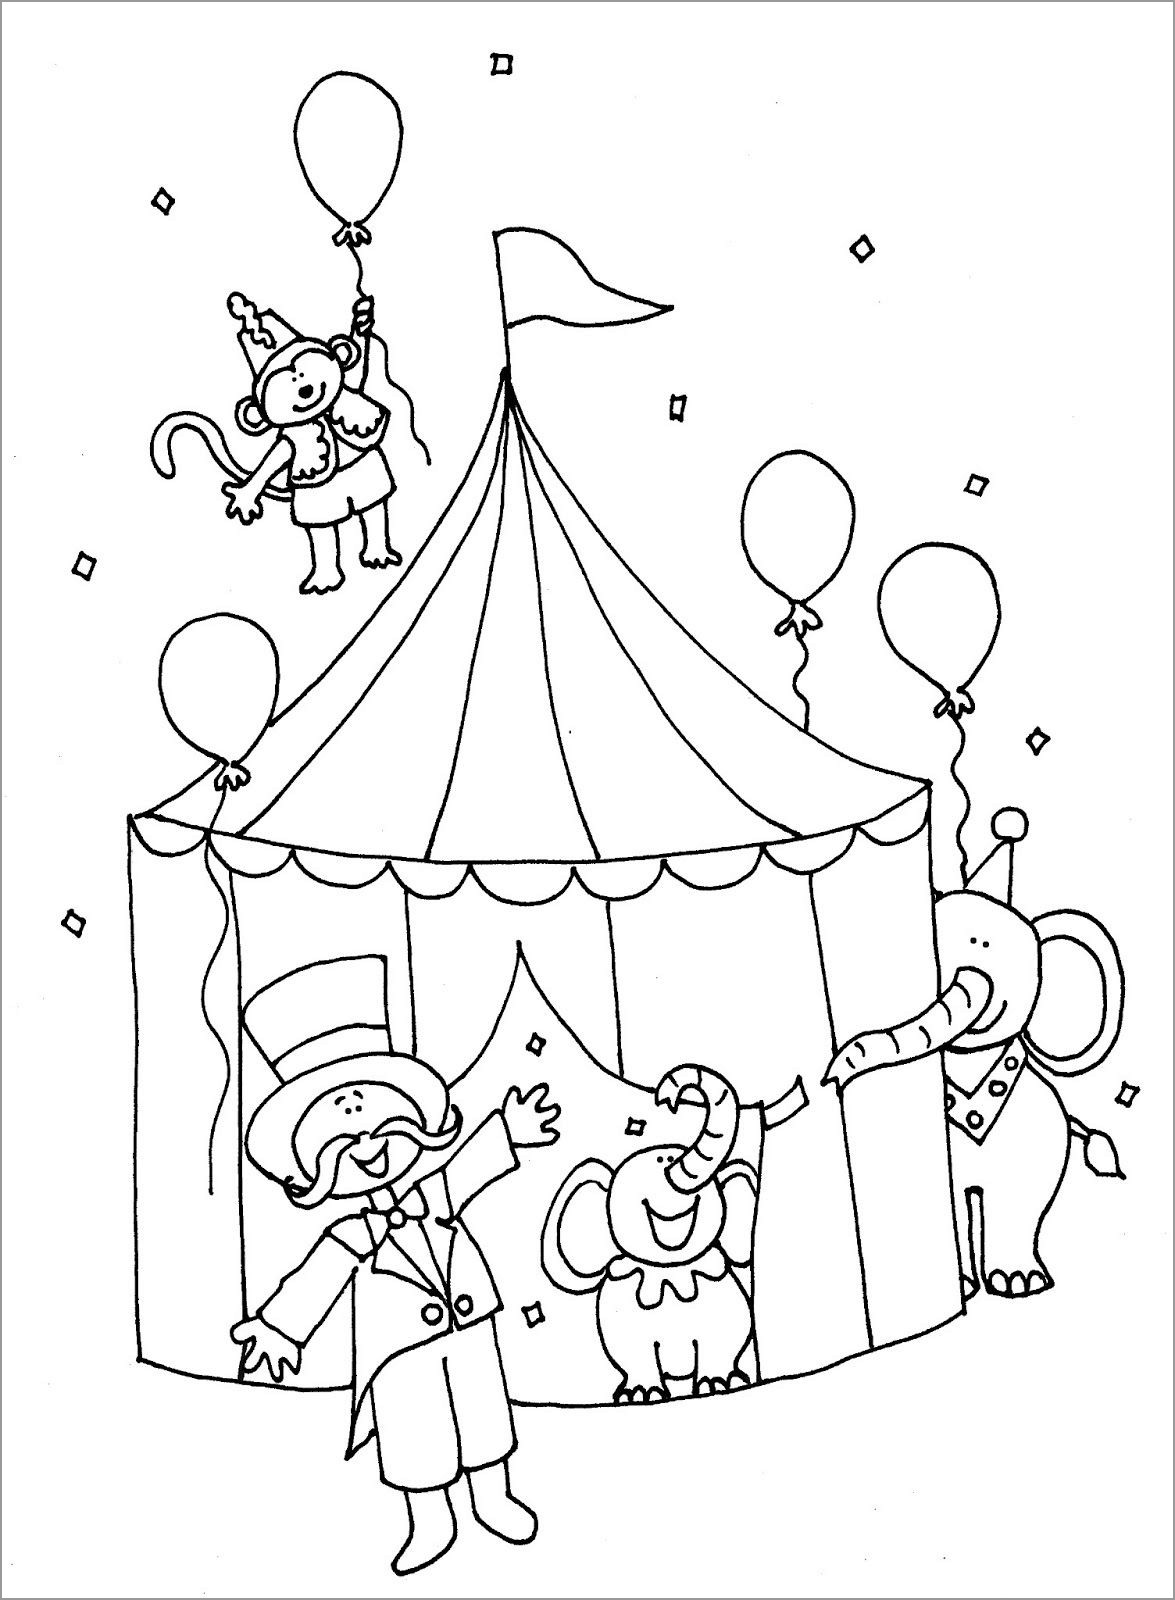 Circus Acrobat Tent Coloring Page